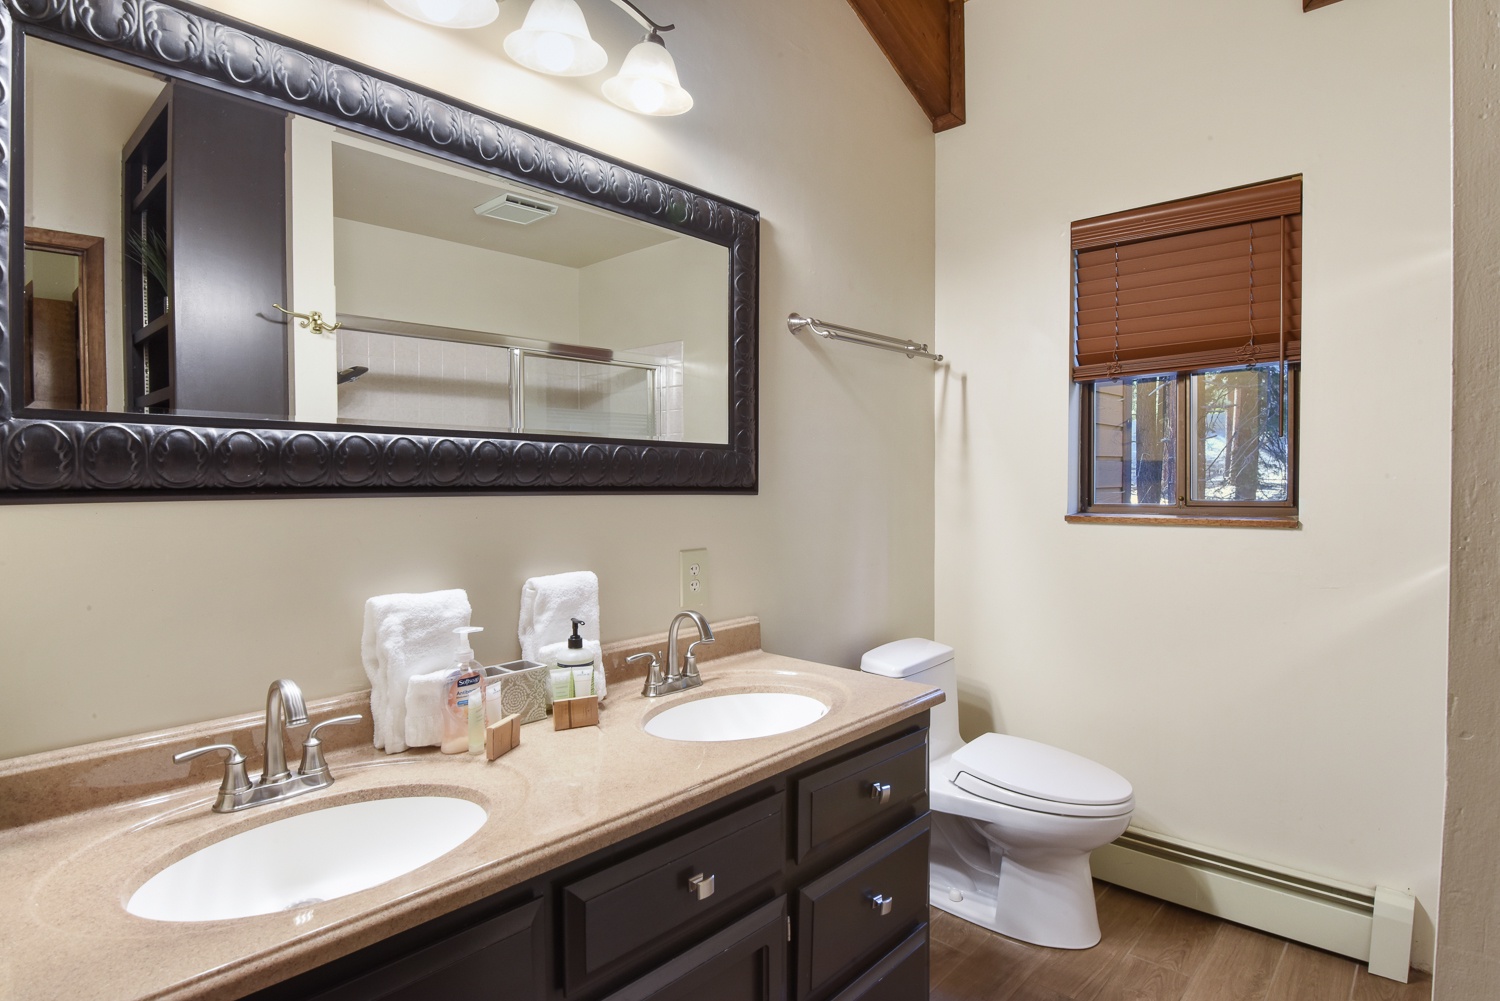 Unit #2: The 3rd level bathroom offers a spacious double vanity & shower/tub combo